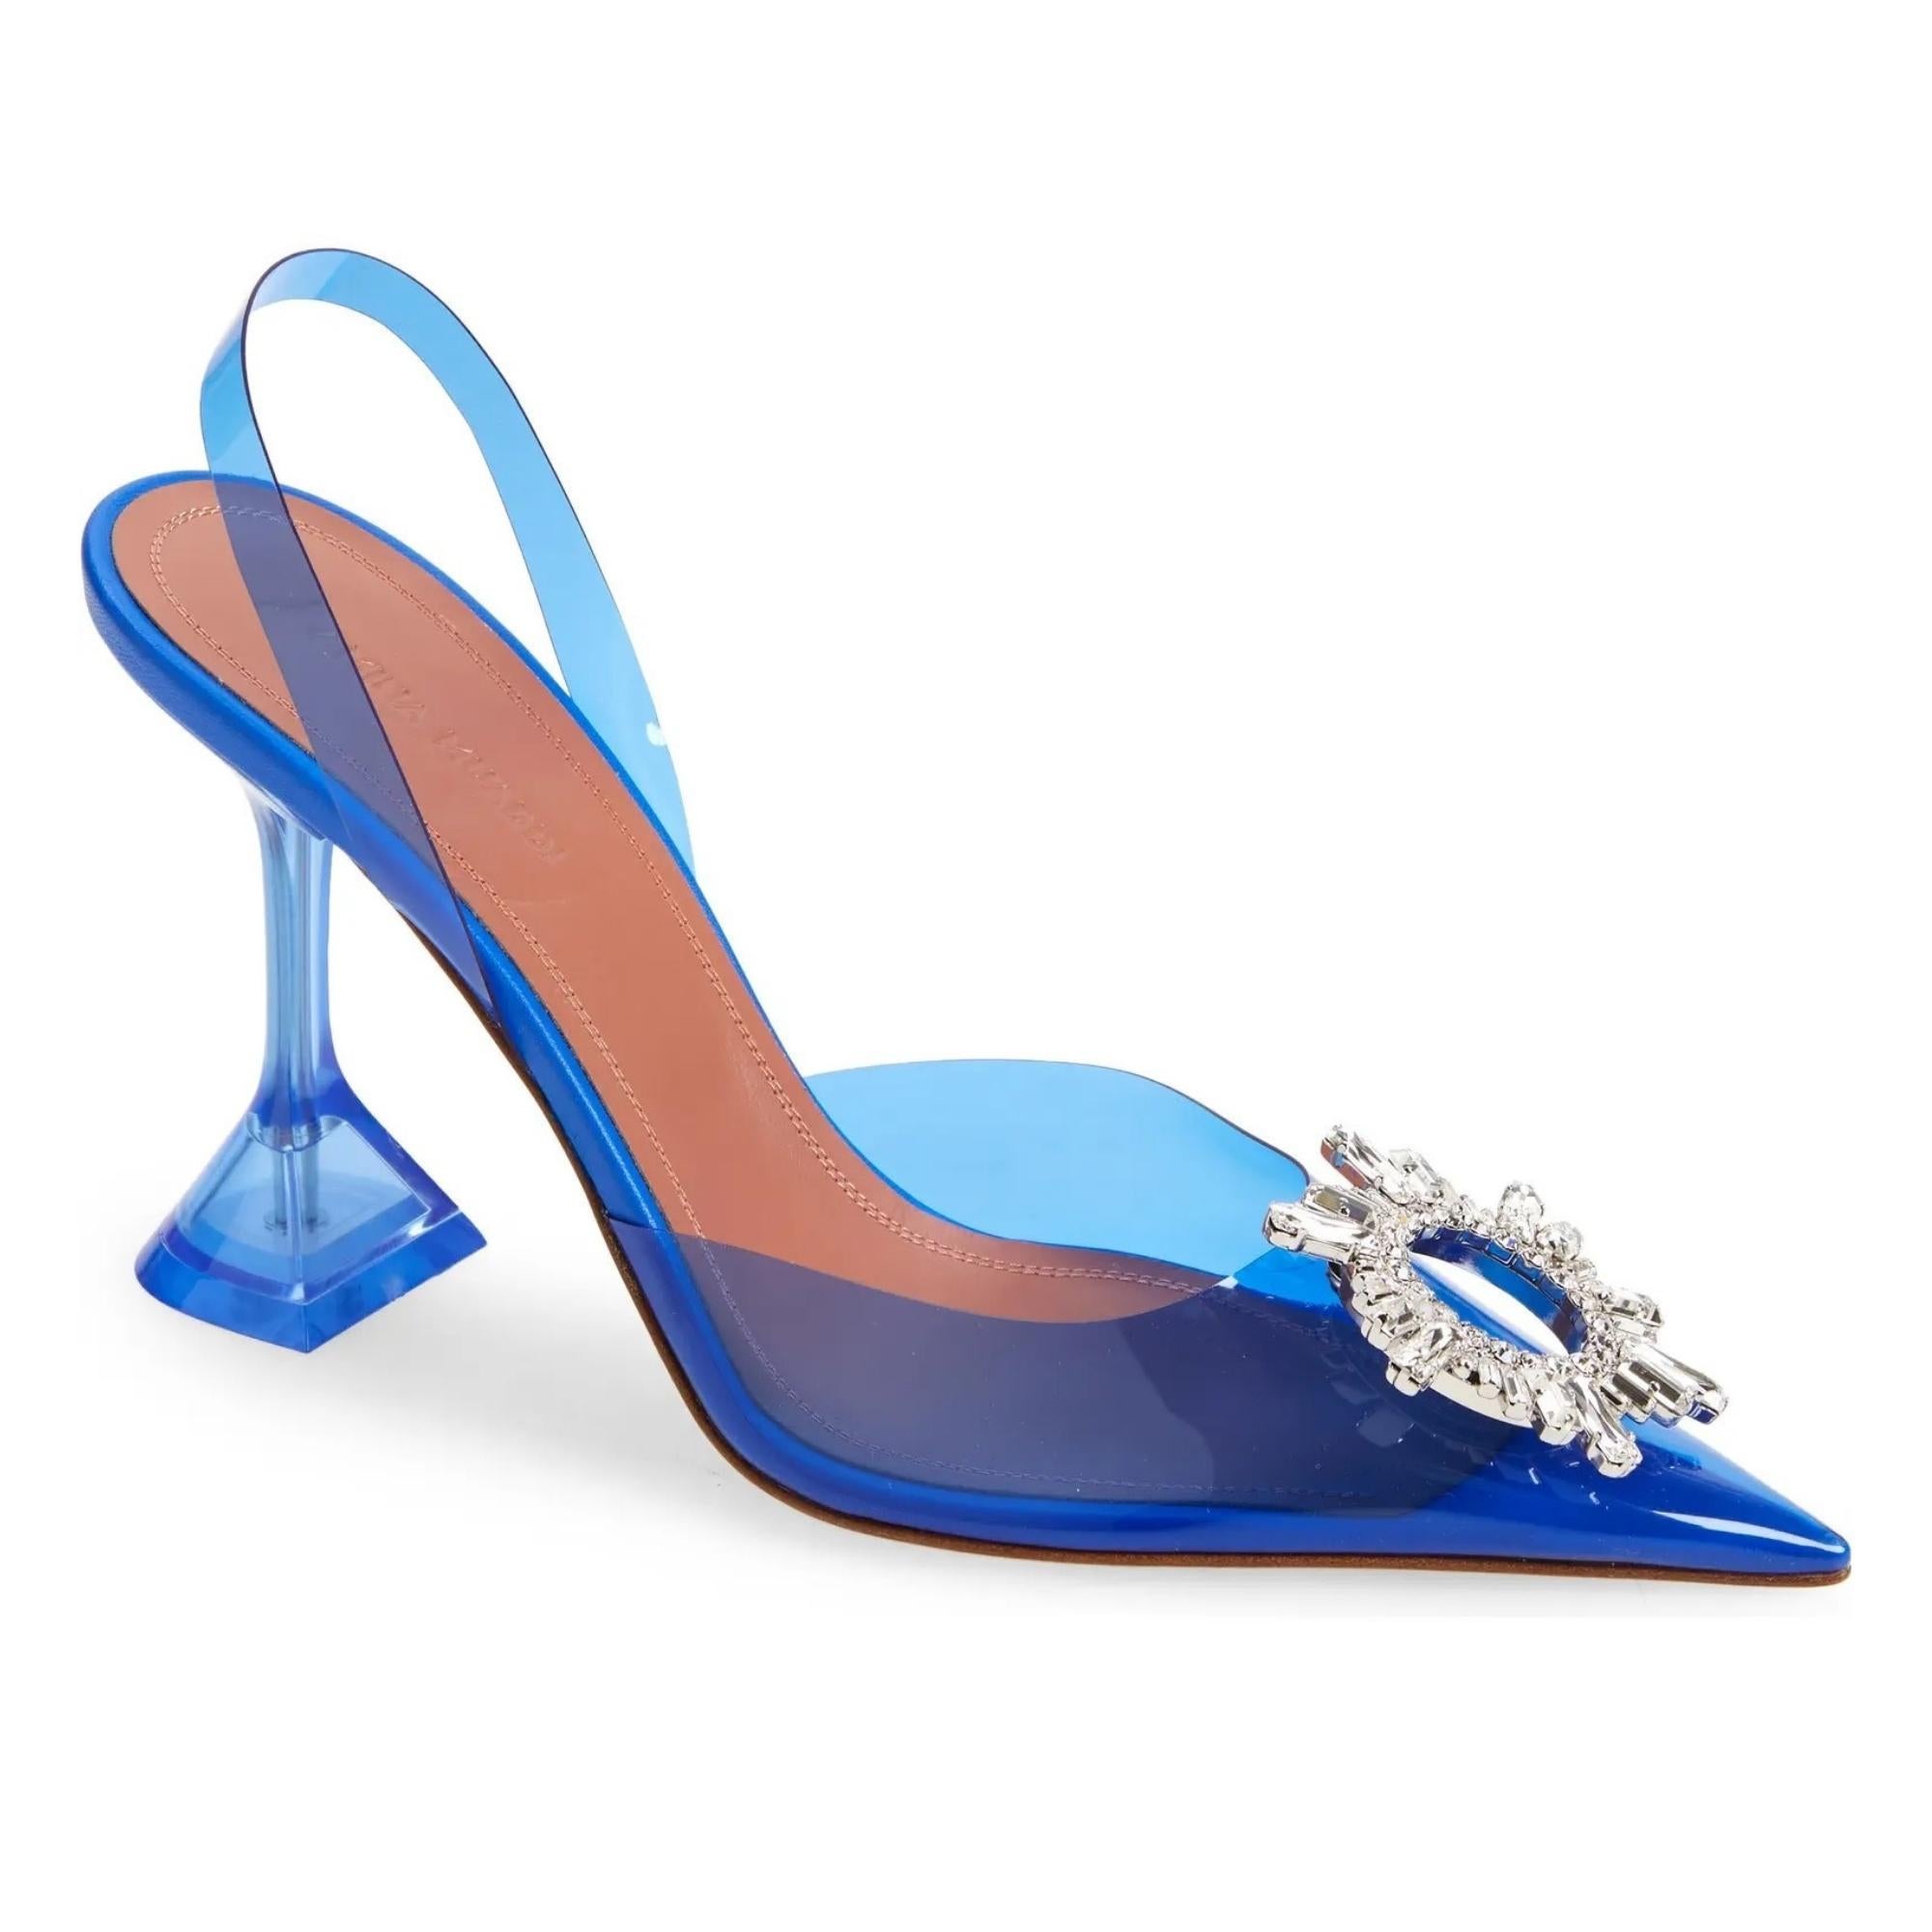 Amina Muaddi Begum PVC Slingback Blue (EU 41  US 10)

This glassy pointy-toe slingback is glammed up with a bejeweled brooch inspired by an art deco sunburst mirror. The signature flared heel has the look of a stiletto, but is more comfortable and